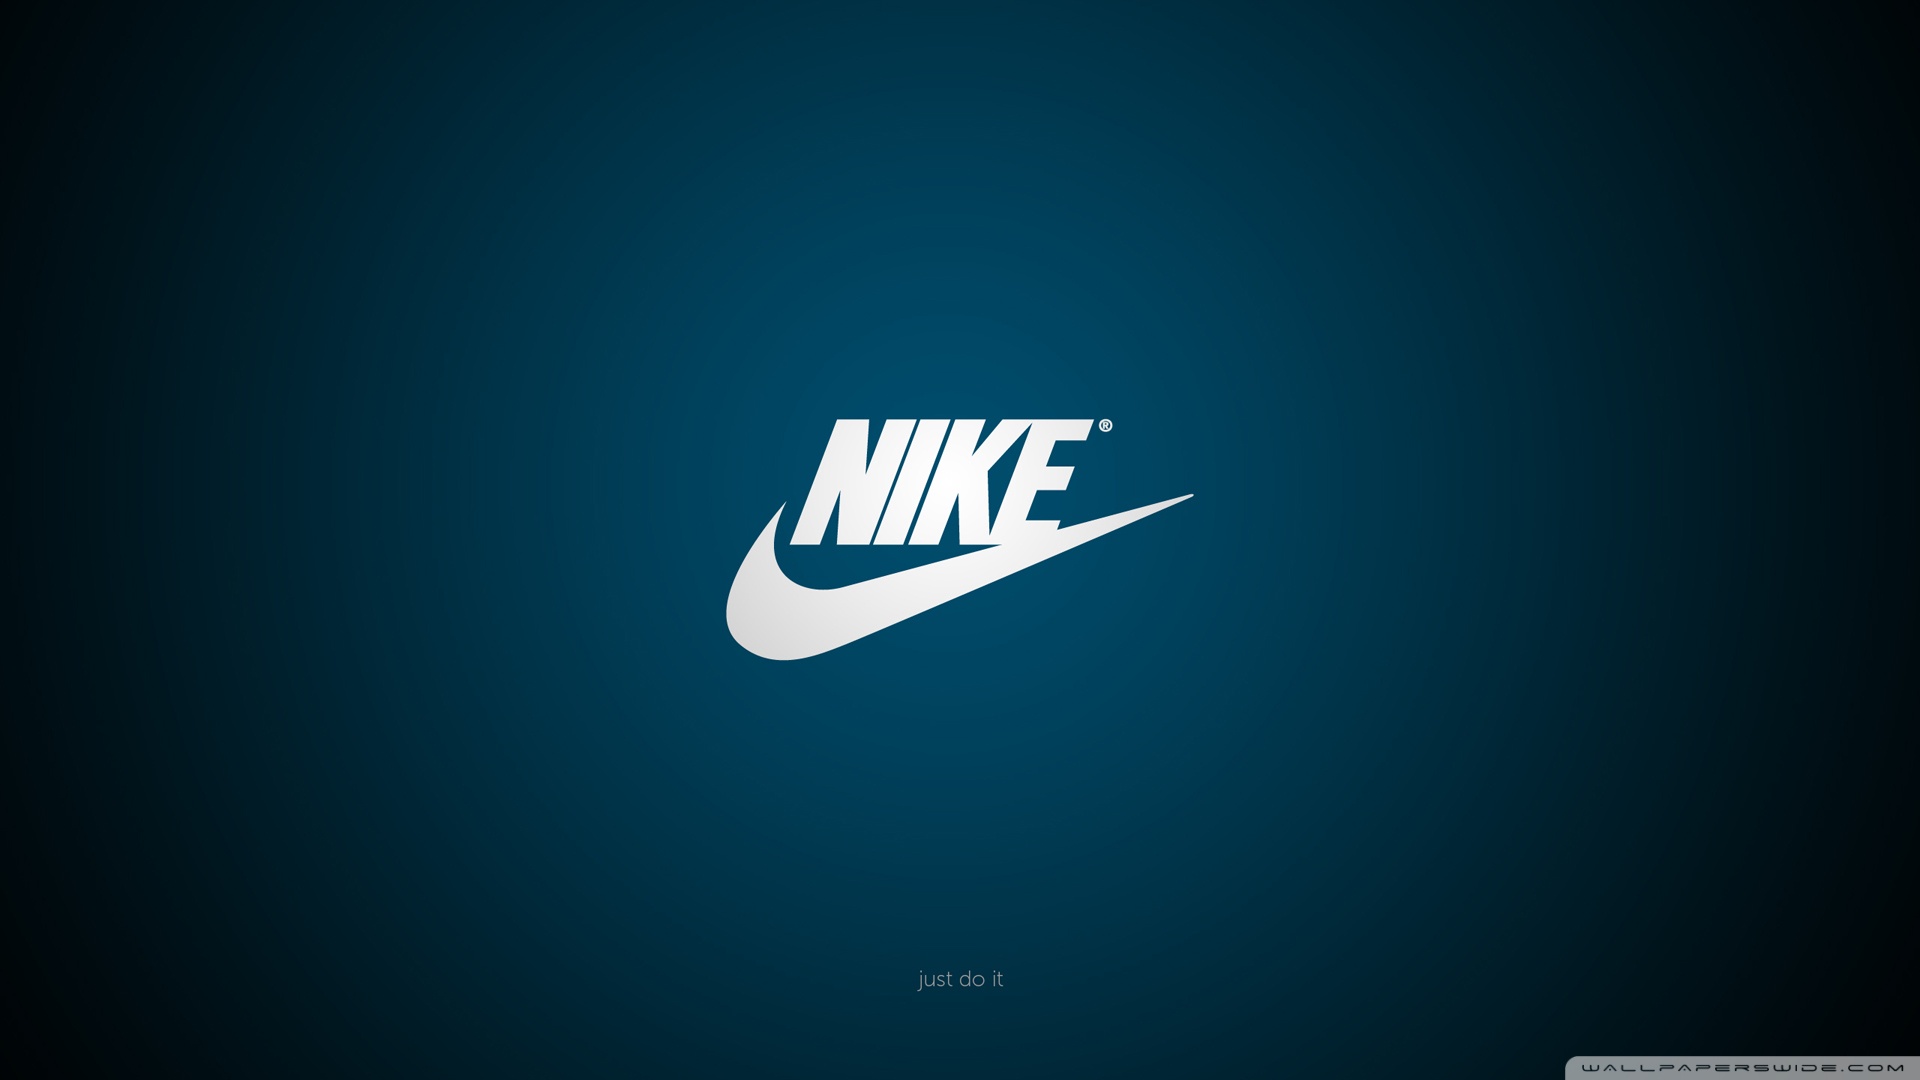 Free download adidas and nike logo MEMES [1920x1080] for your Desktop, Mobile & Tablet. Explore Nike vs Adidas Wallpaper. Nike vs Adidas Wallpaper, Nike Vs Adidas Wallpaper, Adidas Vs Nike Wallpaper